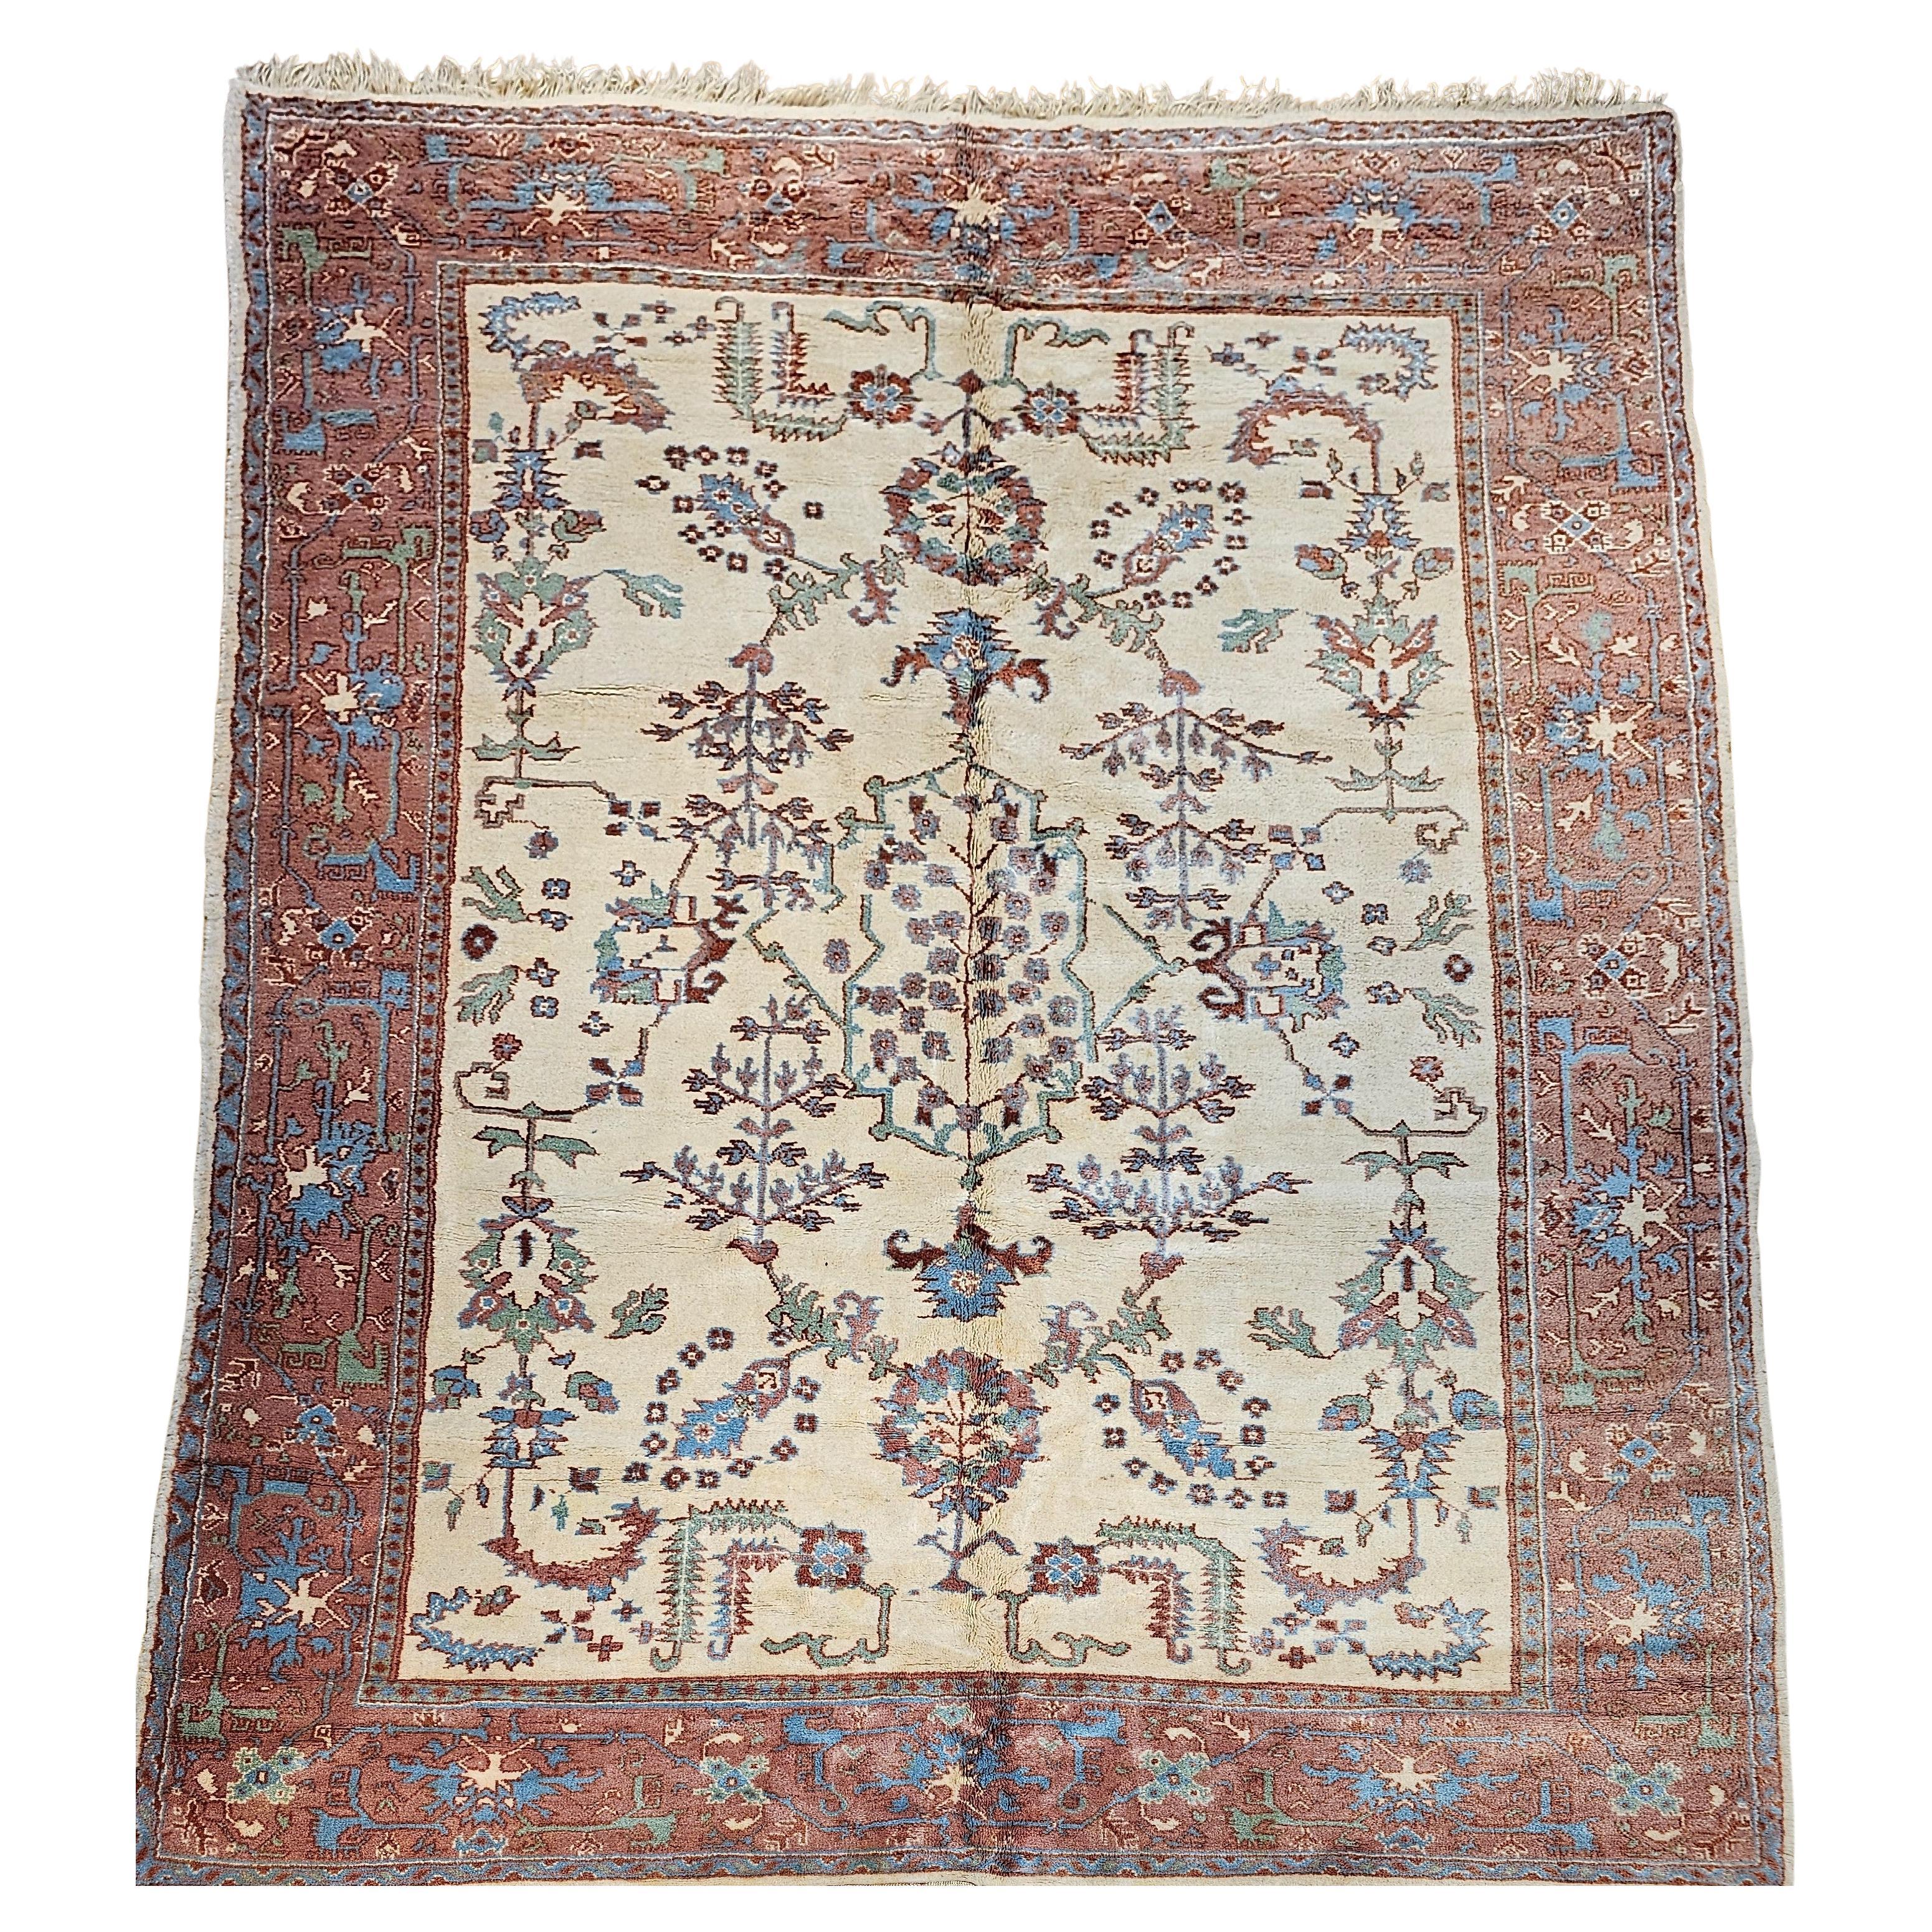 Beautiful vintage mid-1900s Turkish Oushak in an allover geometric design in an ivory color background with accent colors in torquoise blue, green and brown. Larger design forms of branches and leaves are scattered throughout the field and the